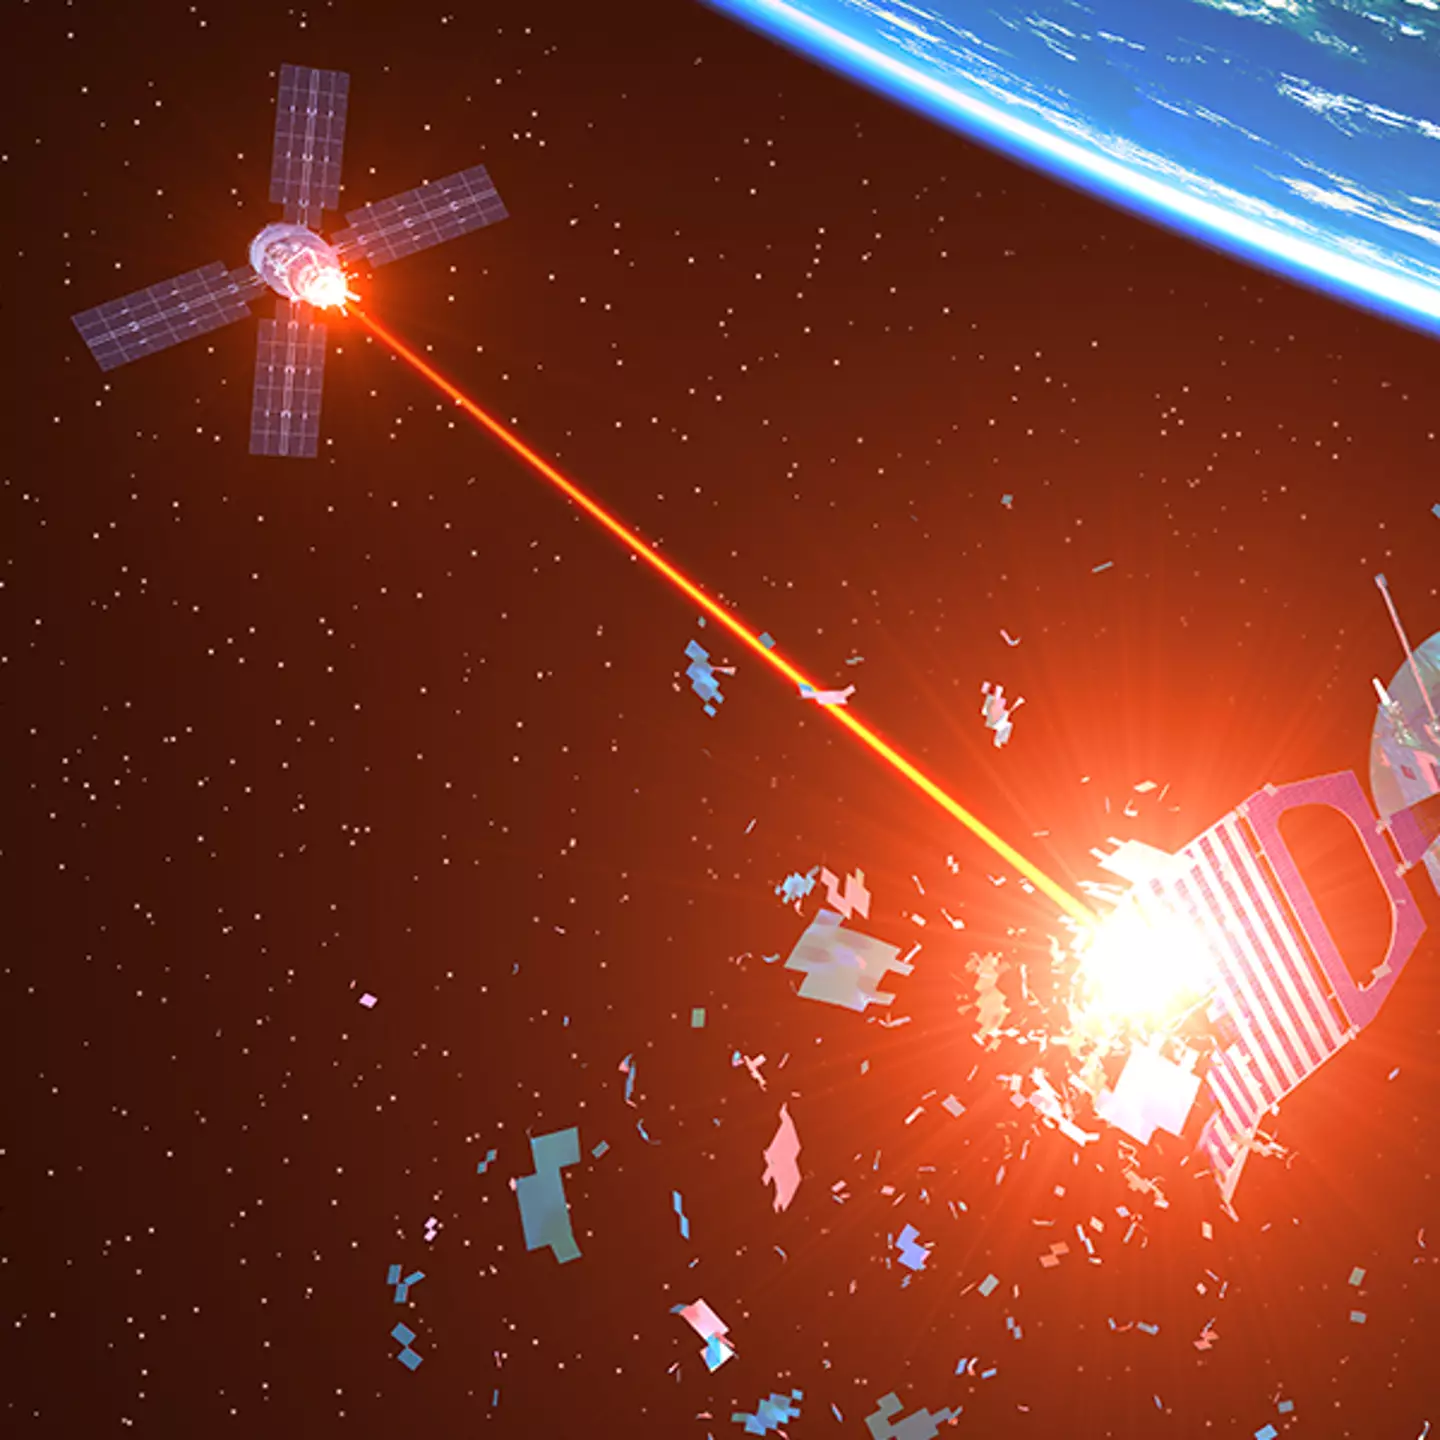 Earth receives power beamed from satellite in space for the first time